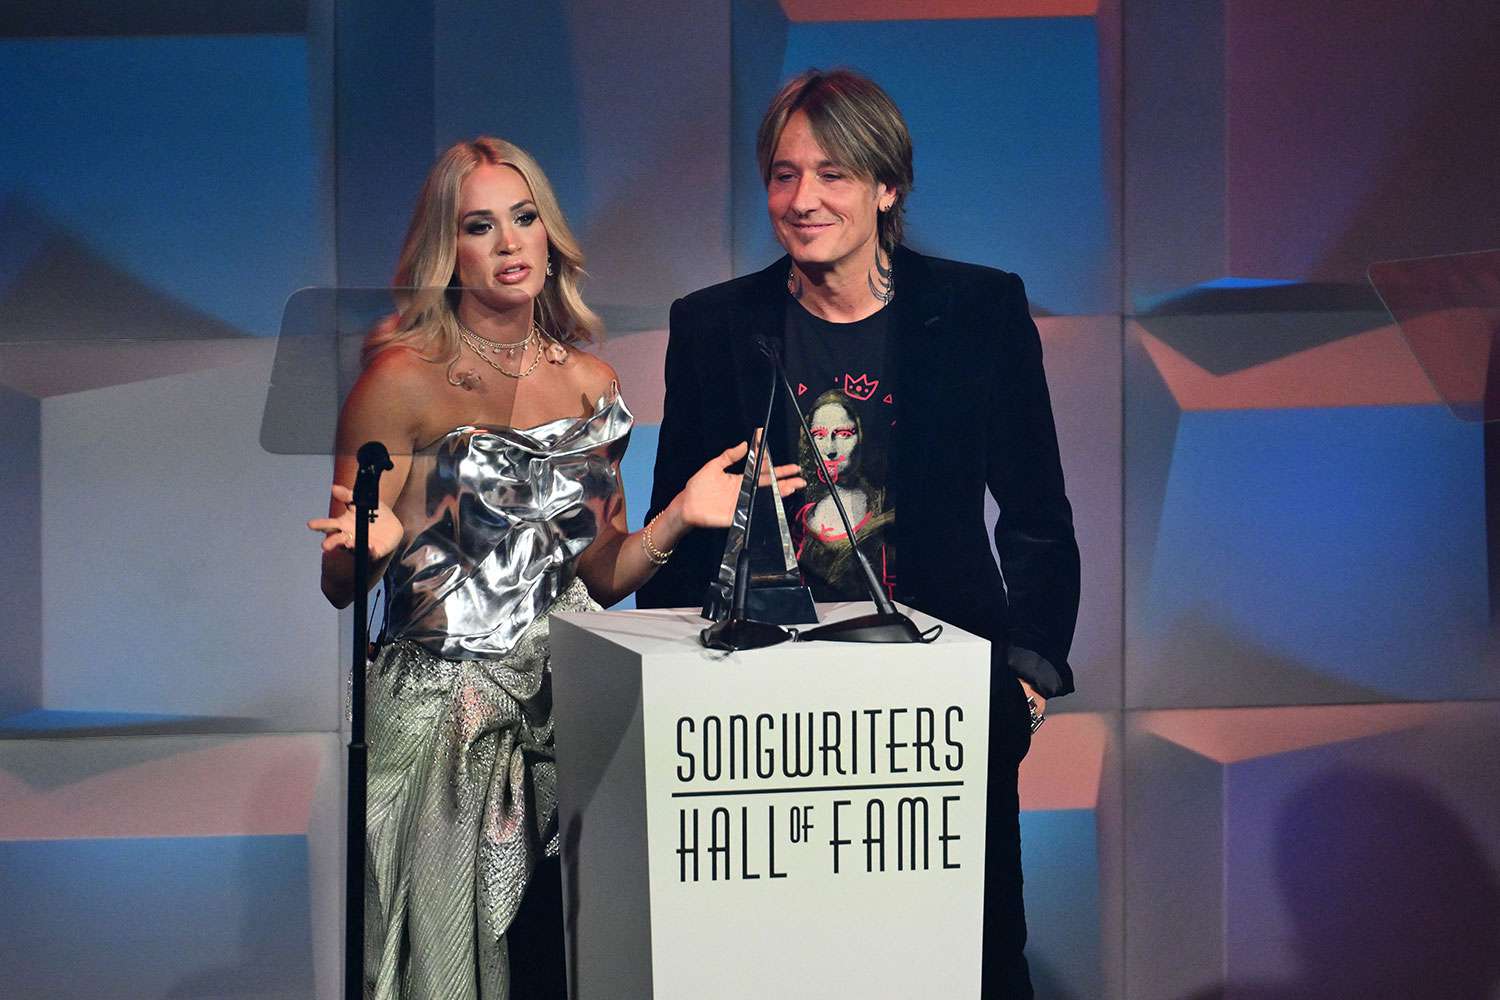 US singer-songwriter Carrie Underwood (L) and Australian-US musician Keith Urban speak onstage during the Songwriters Hall of Fame 2024 induction and awards gala at the New York Marriott Marquis Hotel in New York City on June 13, 2024.